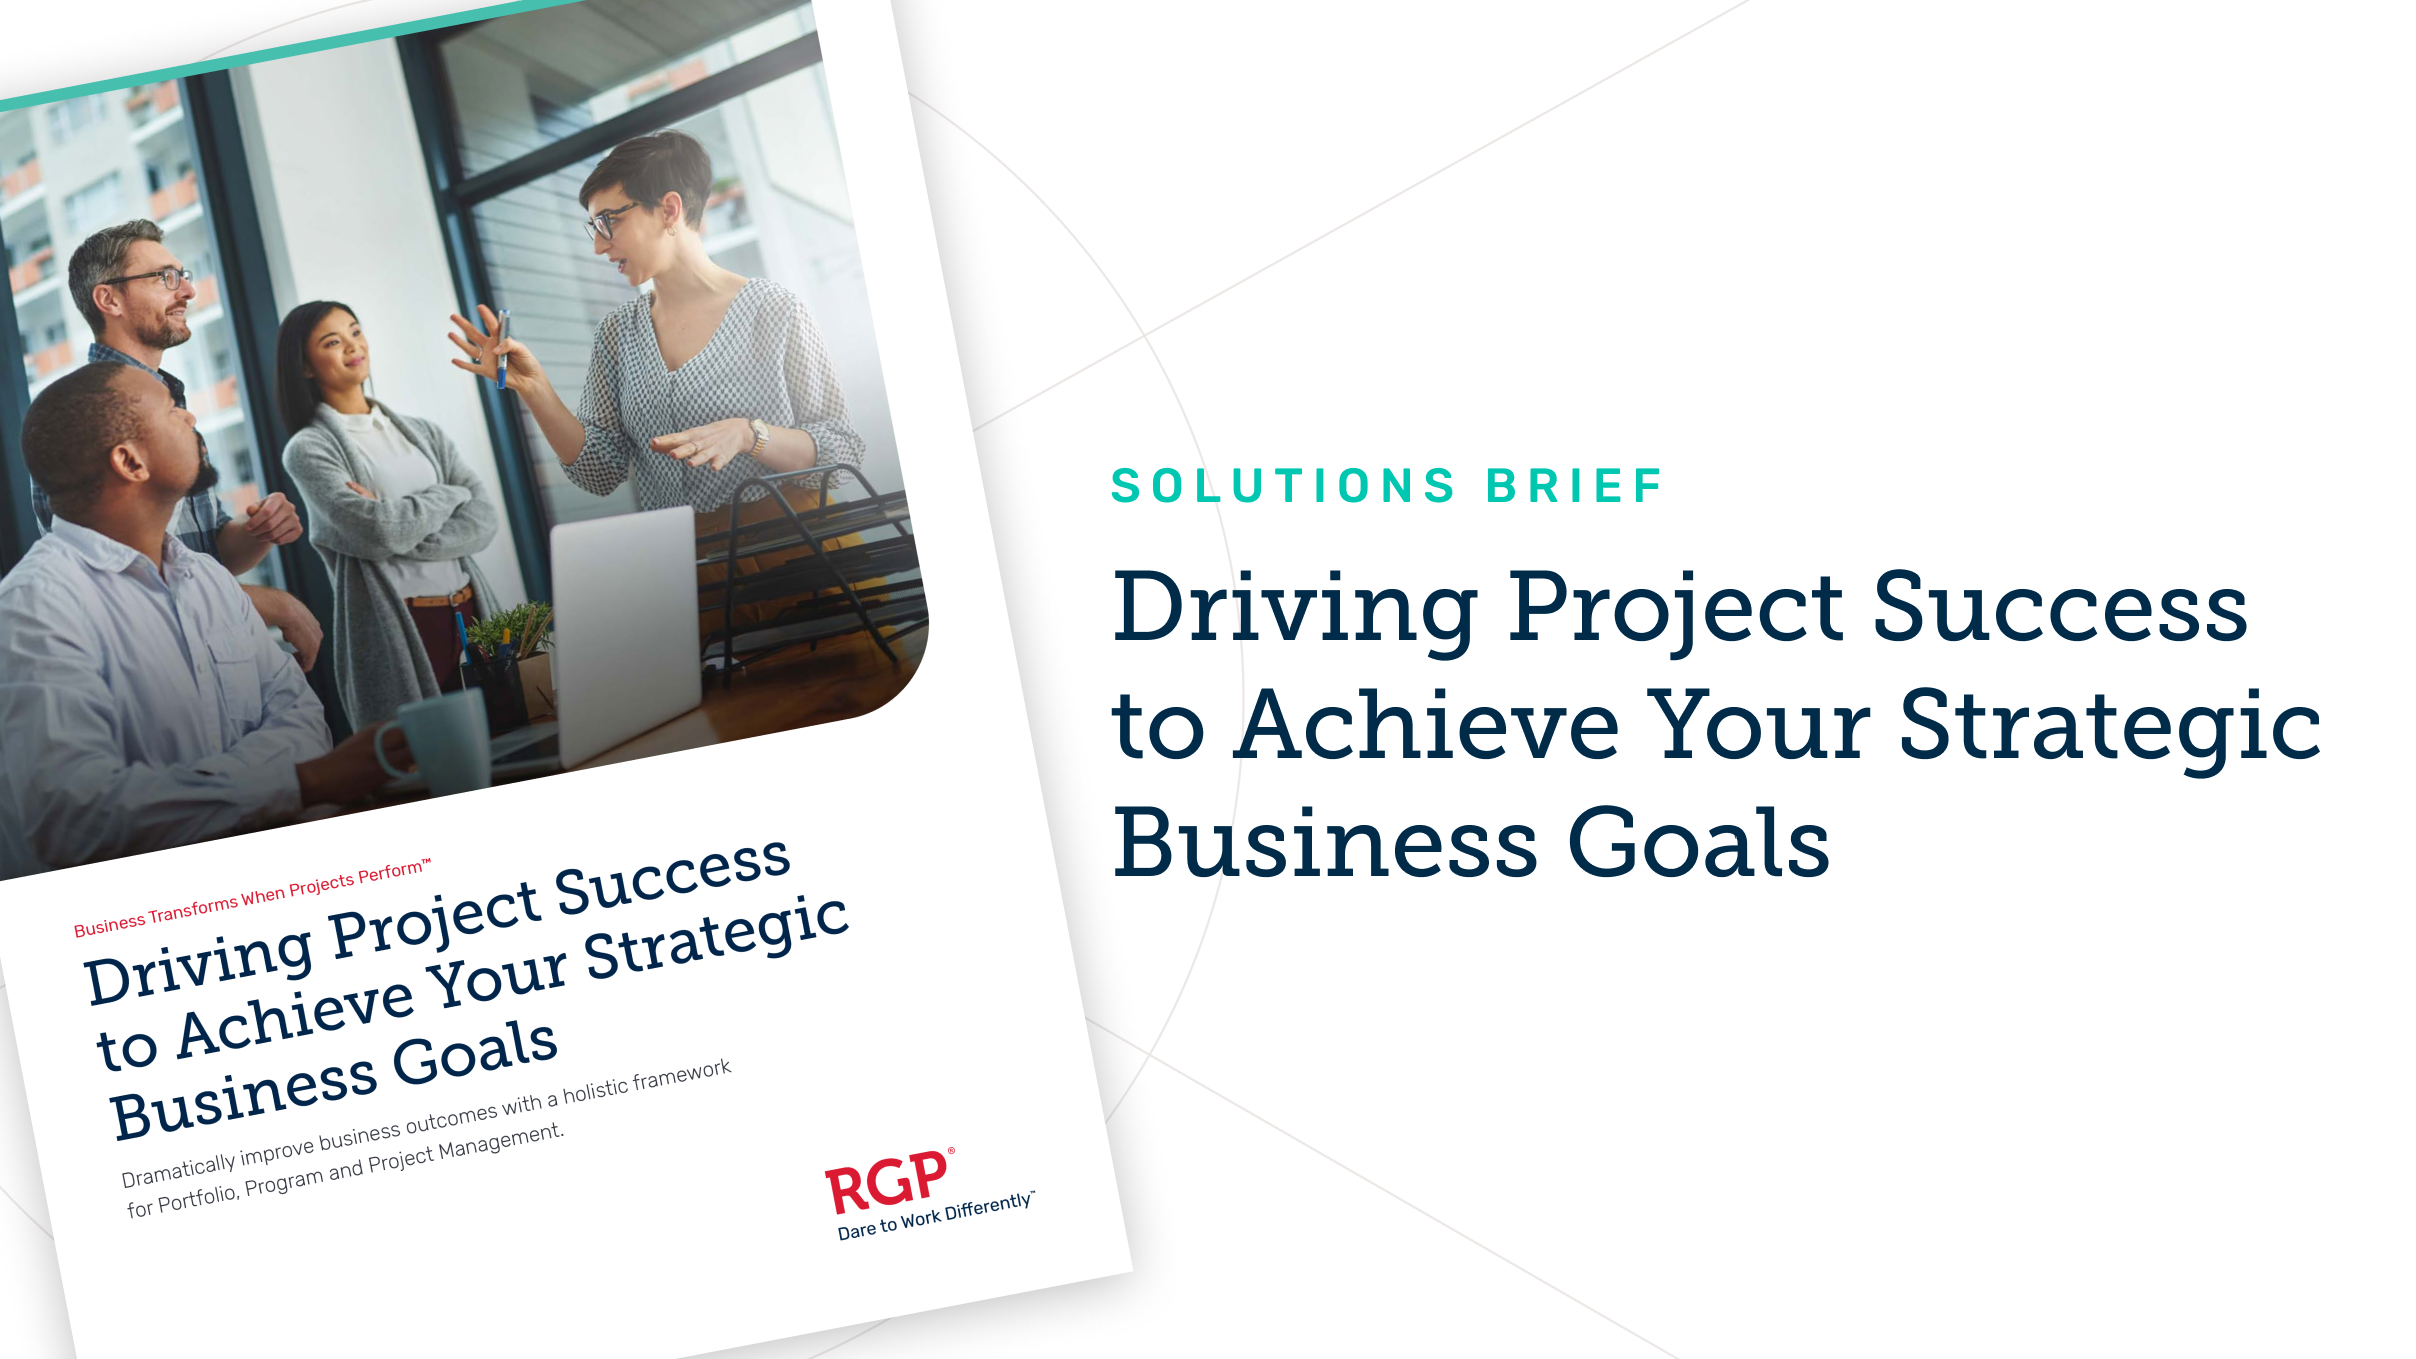 Promo image for RGP Driving Project Success Solutions Brief